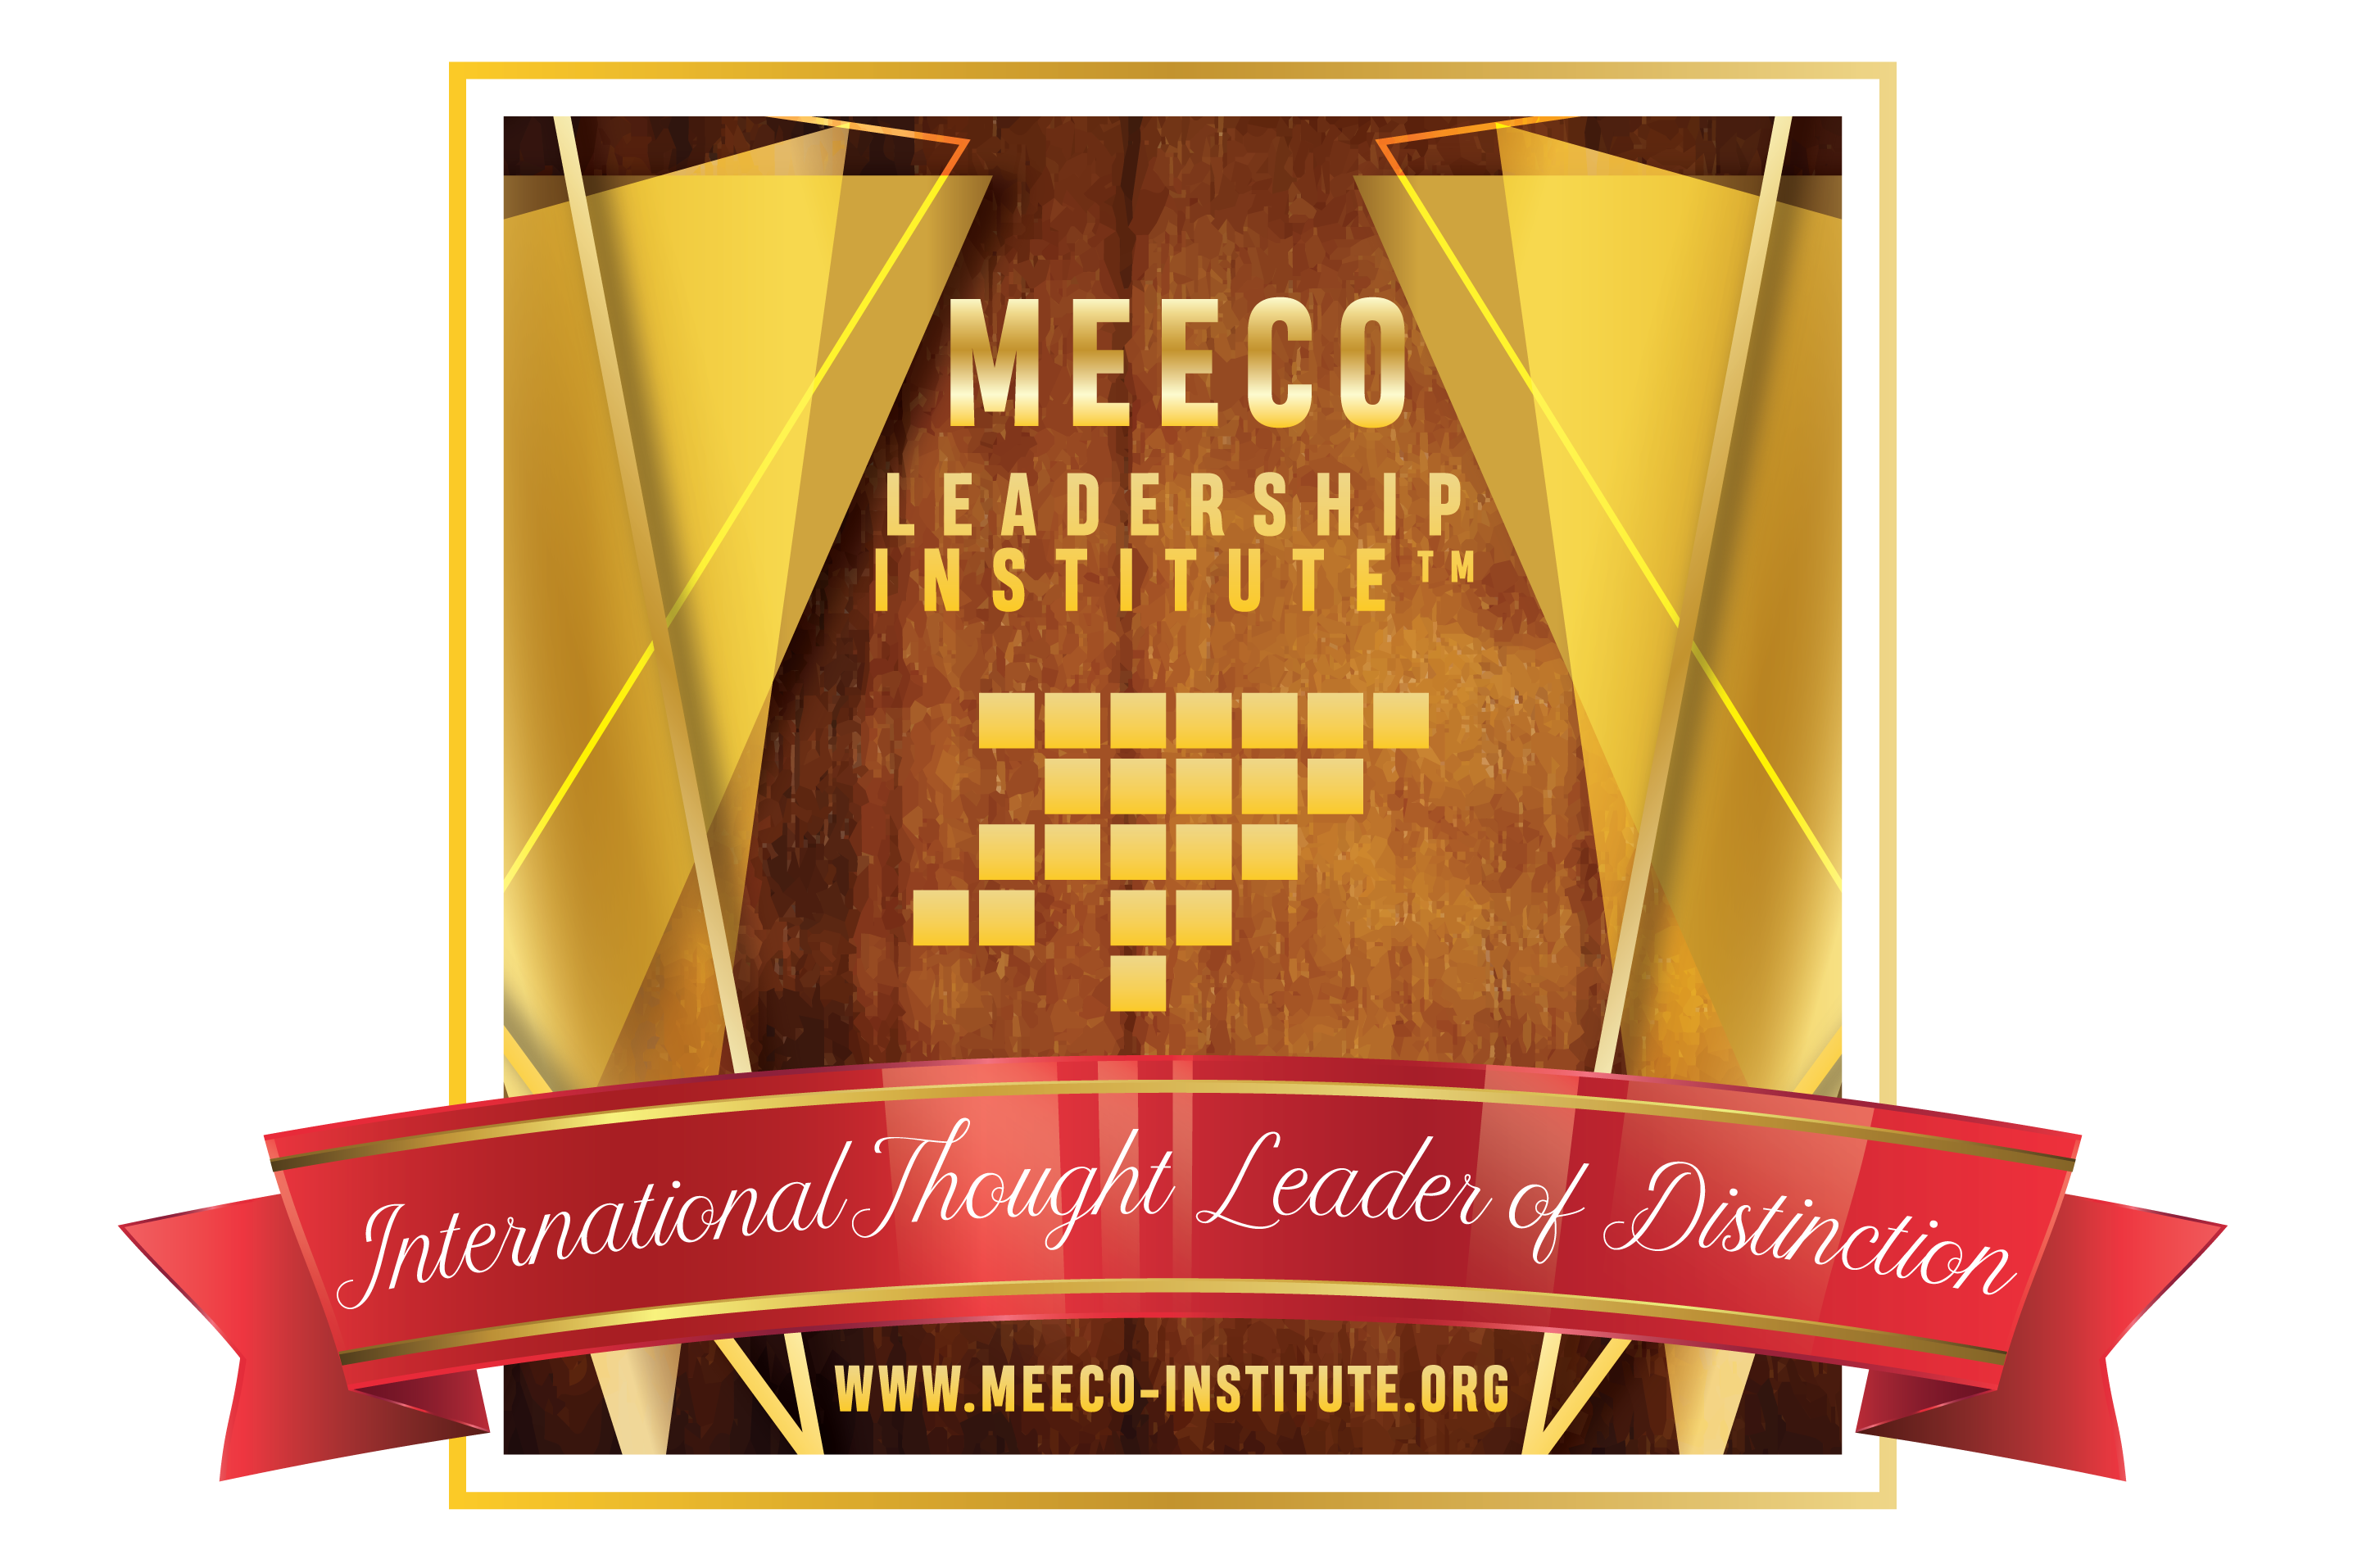 MEECO Thought Leader of Distinction Award